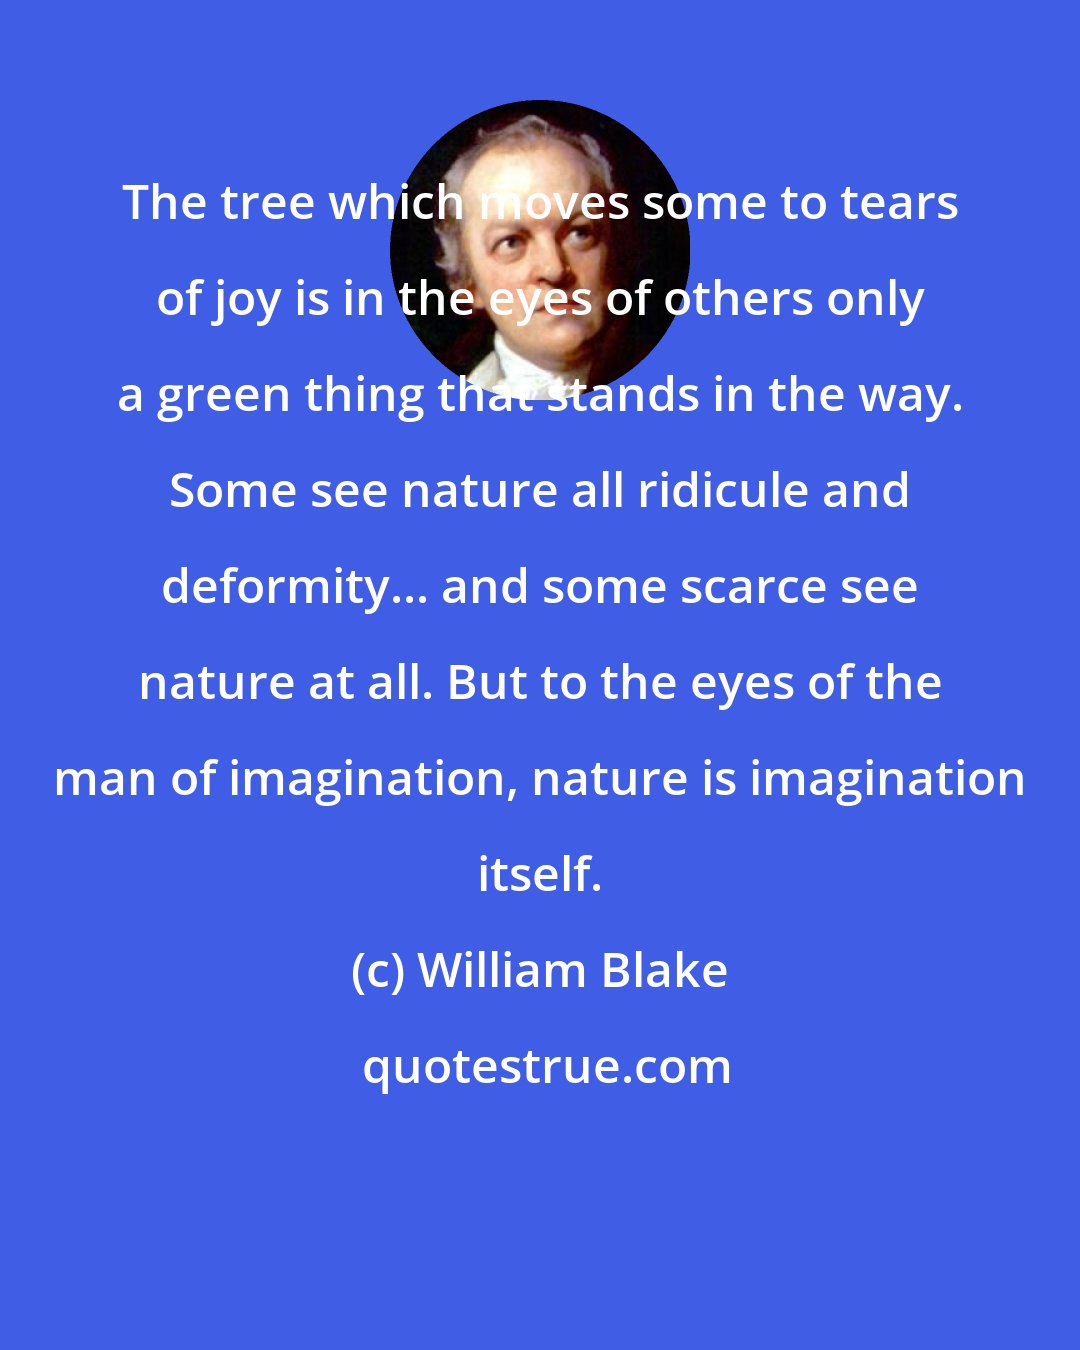 William Blake: The tree which moves some to tears of joy is in the eyes of others only a green thing that stands in the way. Some see nature all ridicule and deformity... and some scarce see nature at all. But to the eyes of the man of imagination, nature is imagination itself.